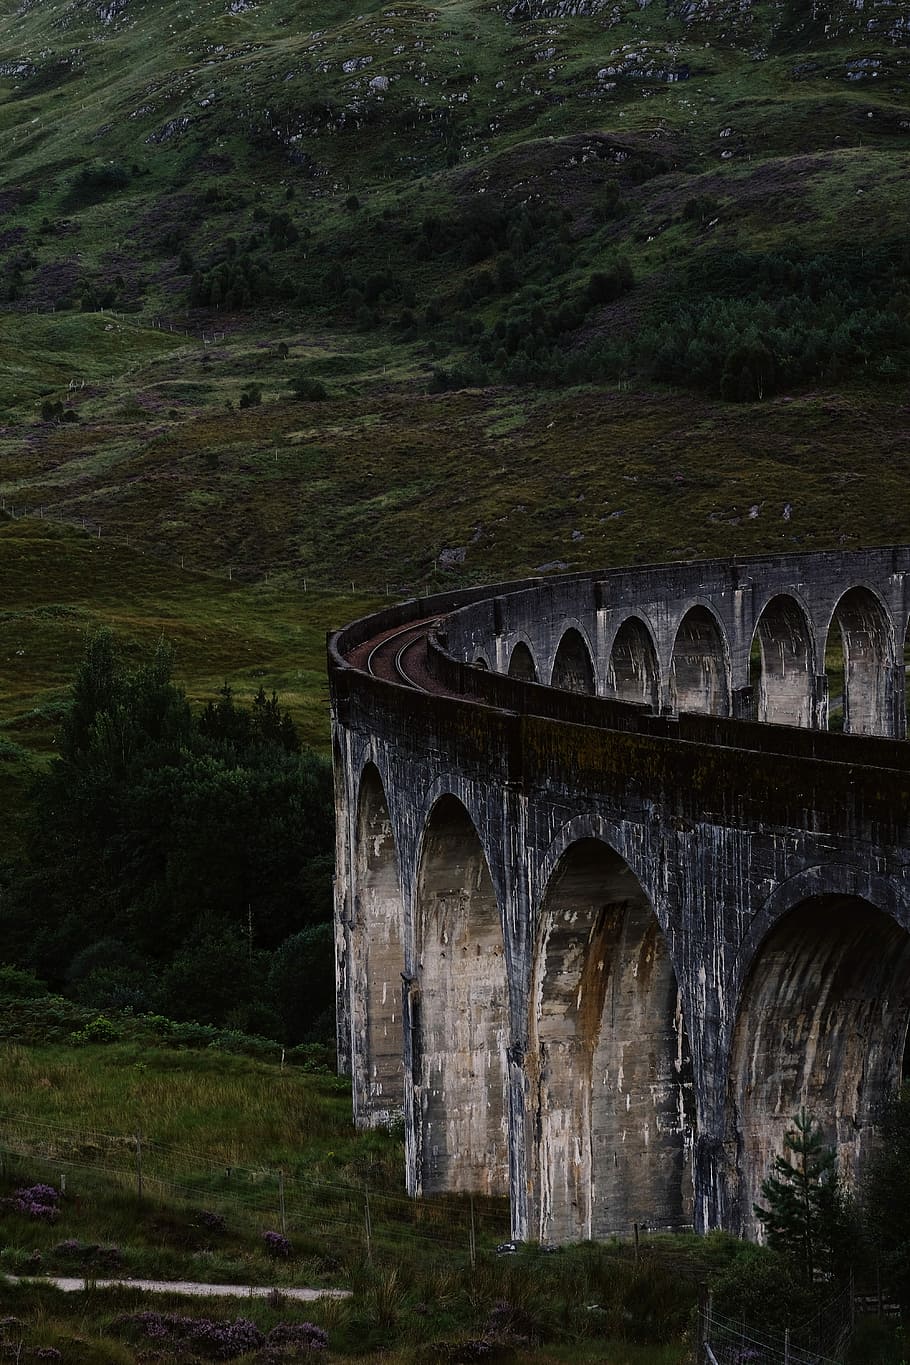 Details of the Glenfinnan Viaduct, photo of vintage brown concrete building